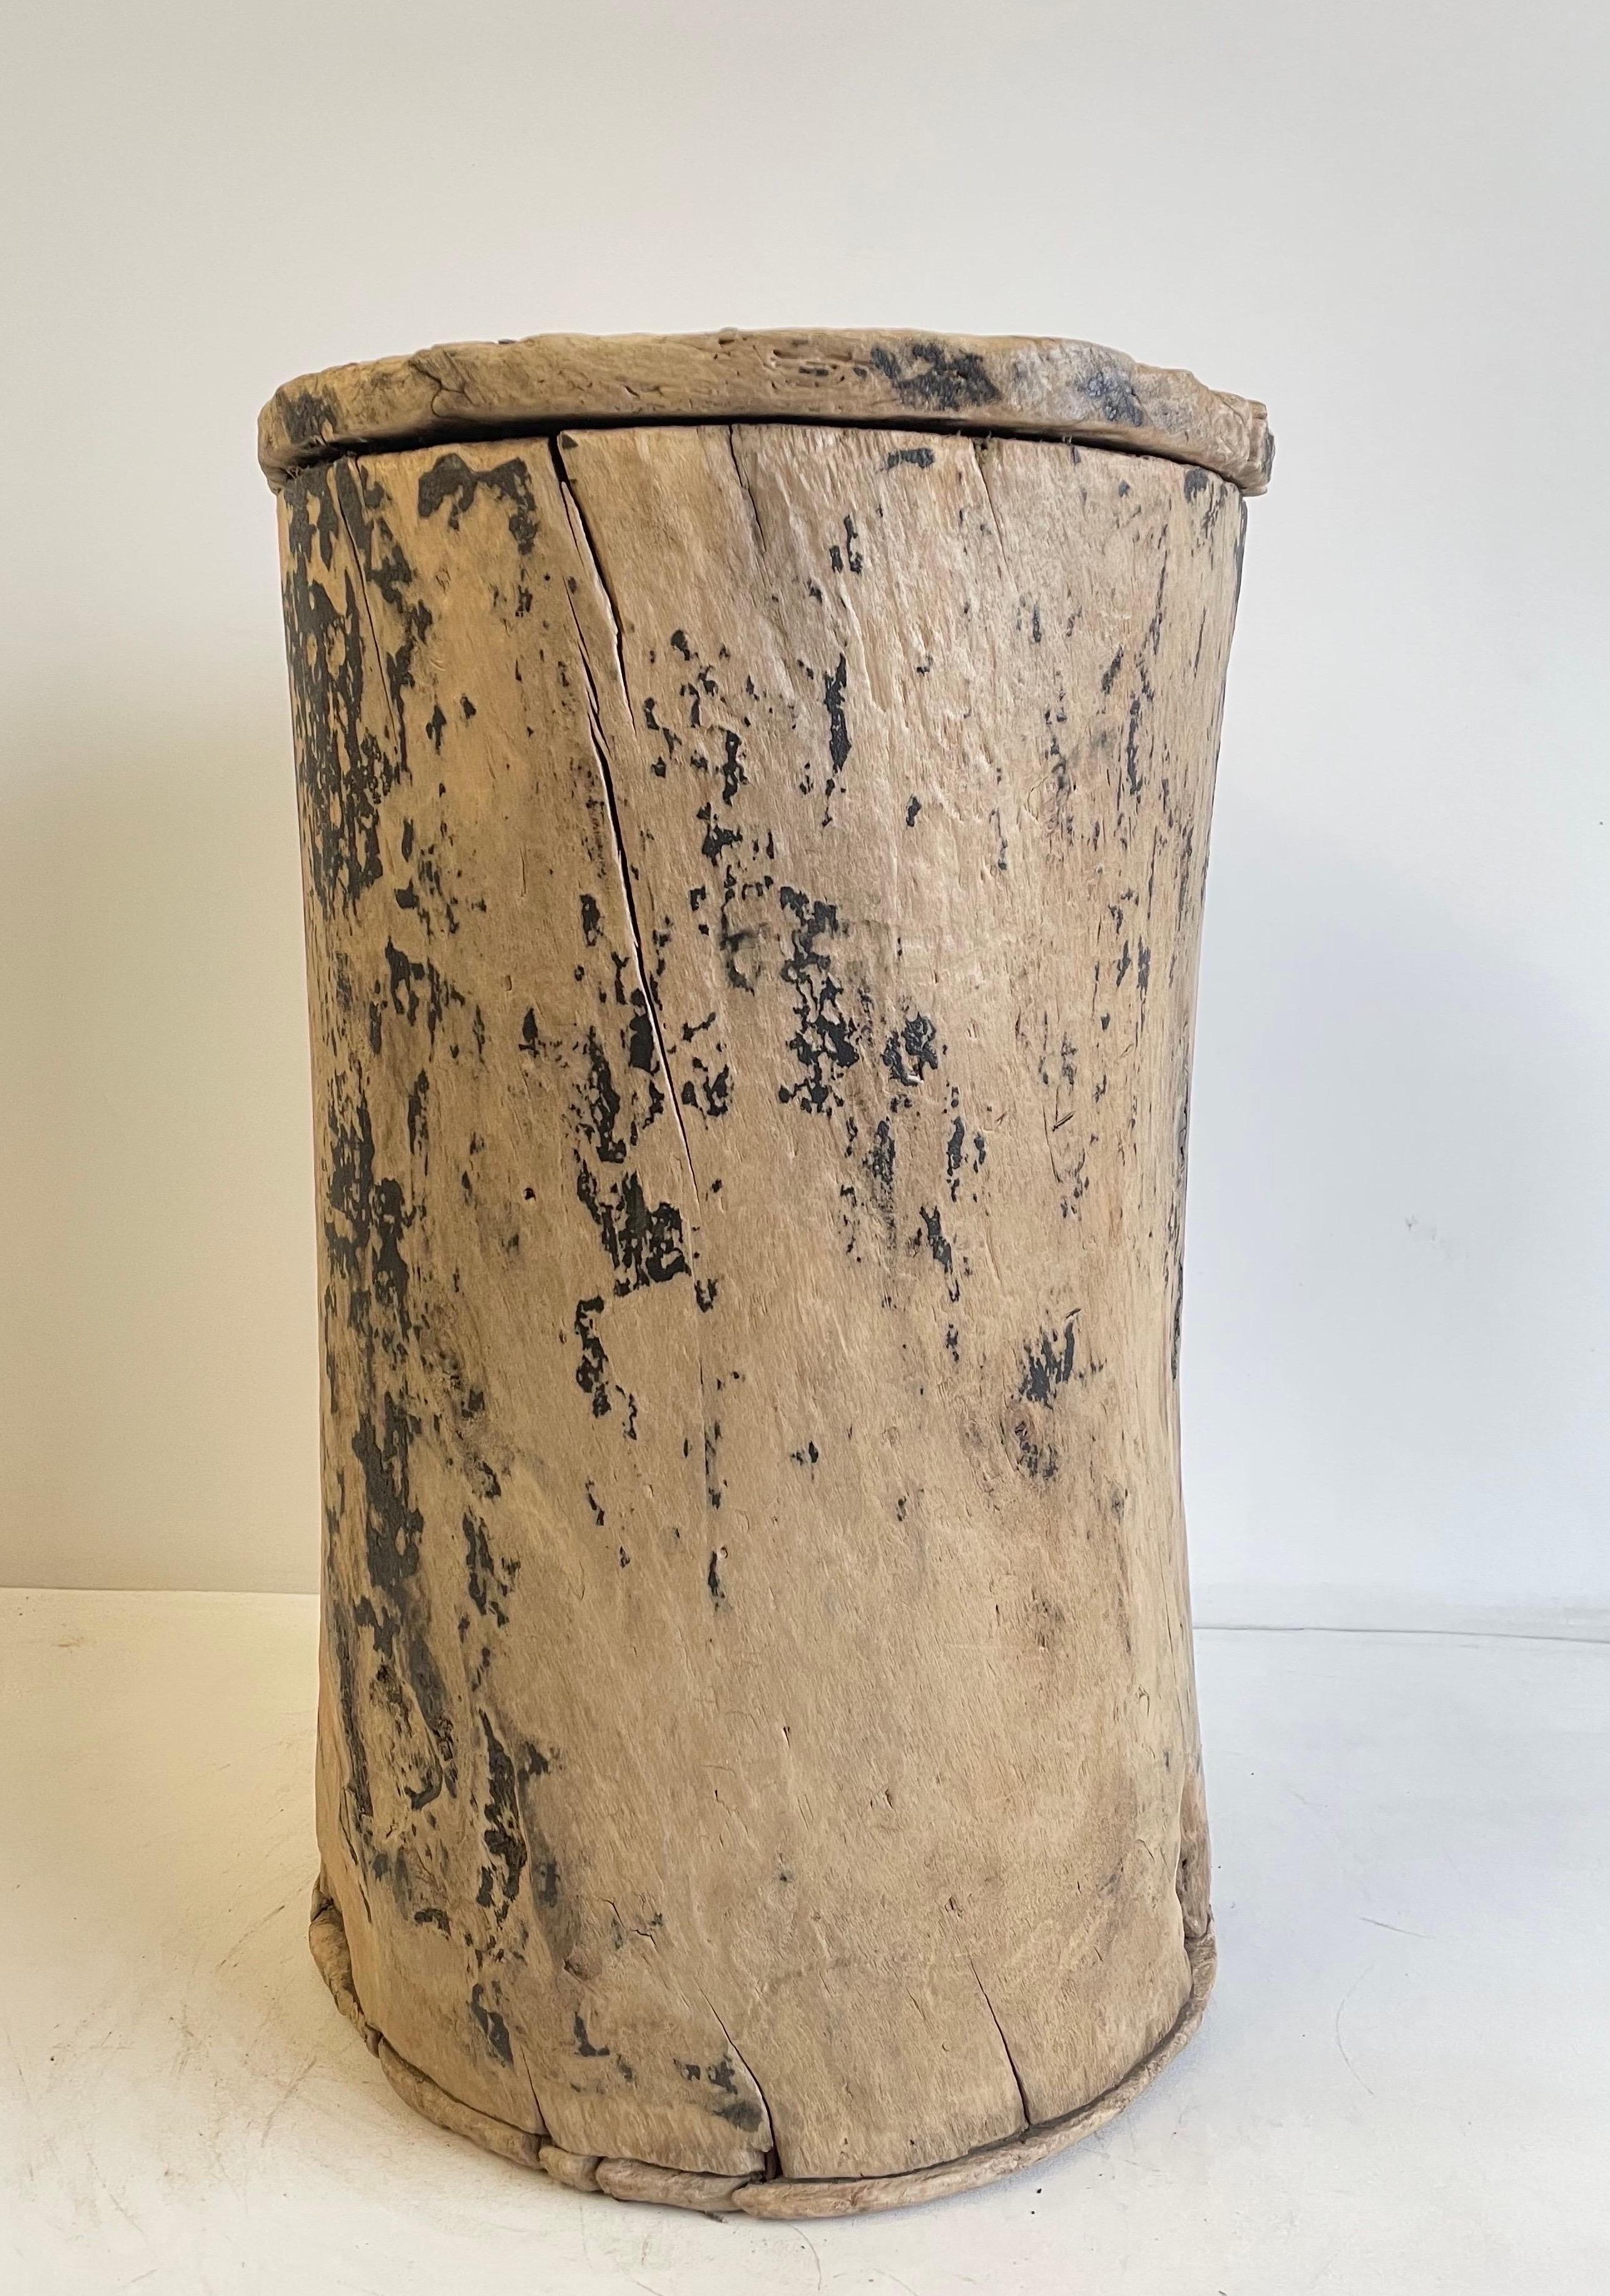 Cypress Wood Side Table Carved From a Stump Bucket with Lid In Good Condition For Sale In Brea, CA